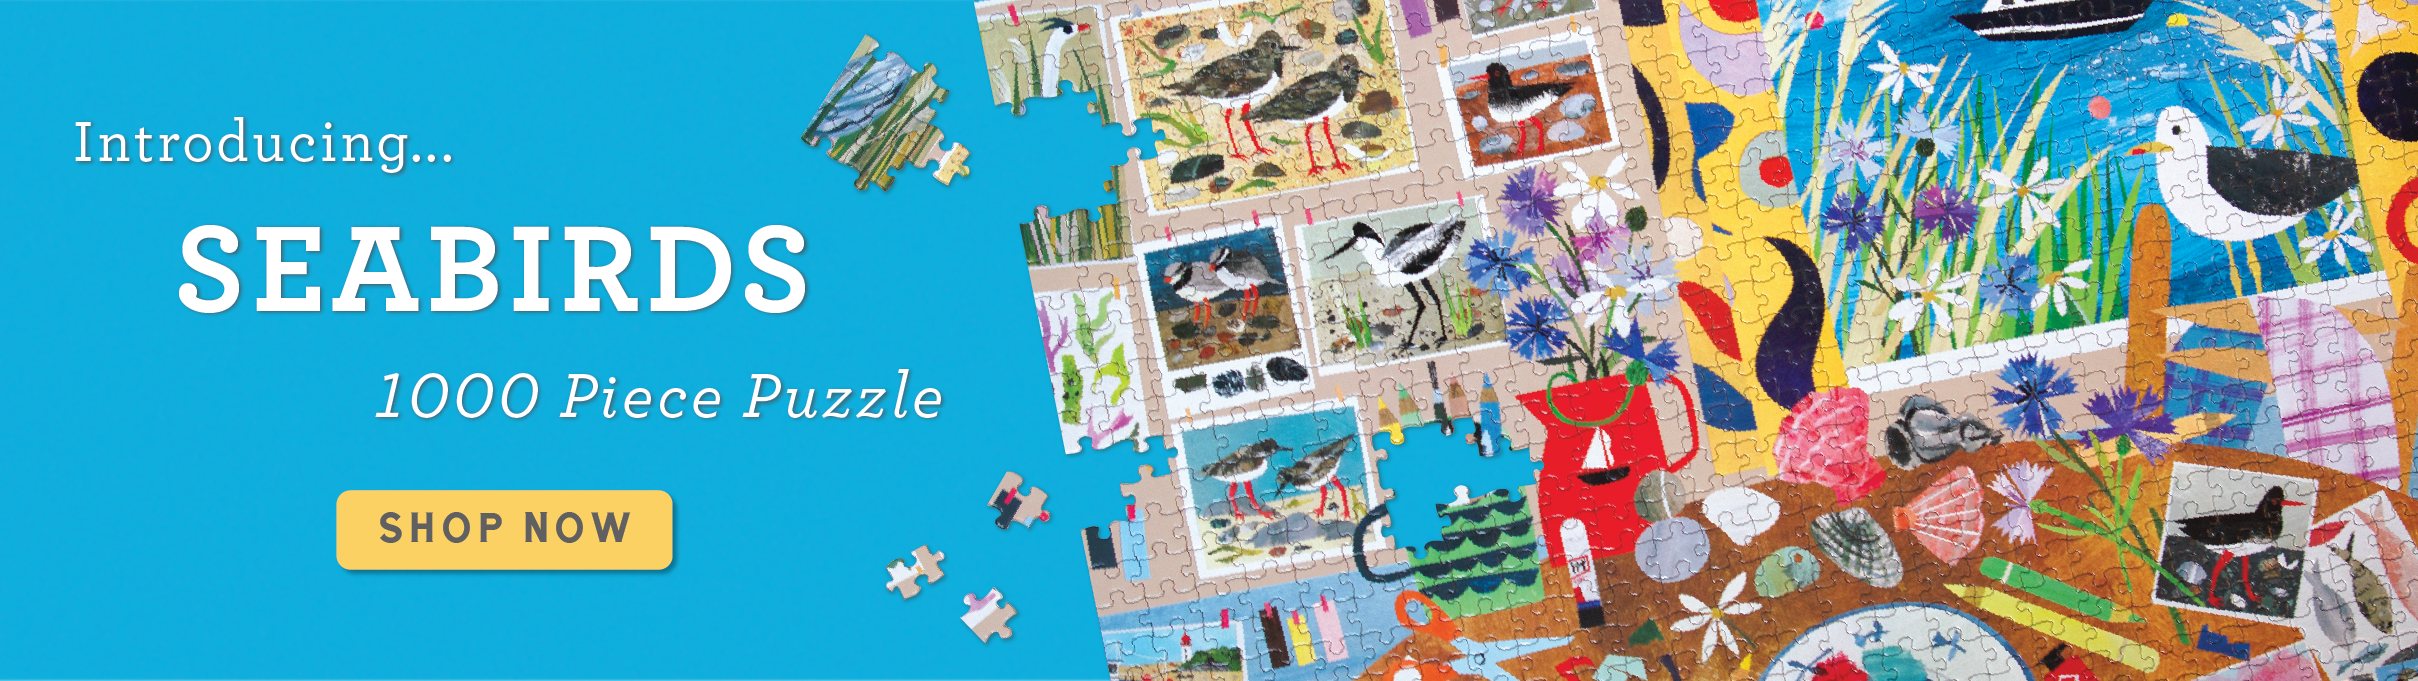 Introducing New Seabirds 1000 Piece Puzzle